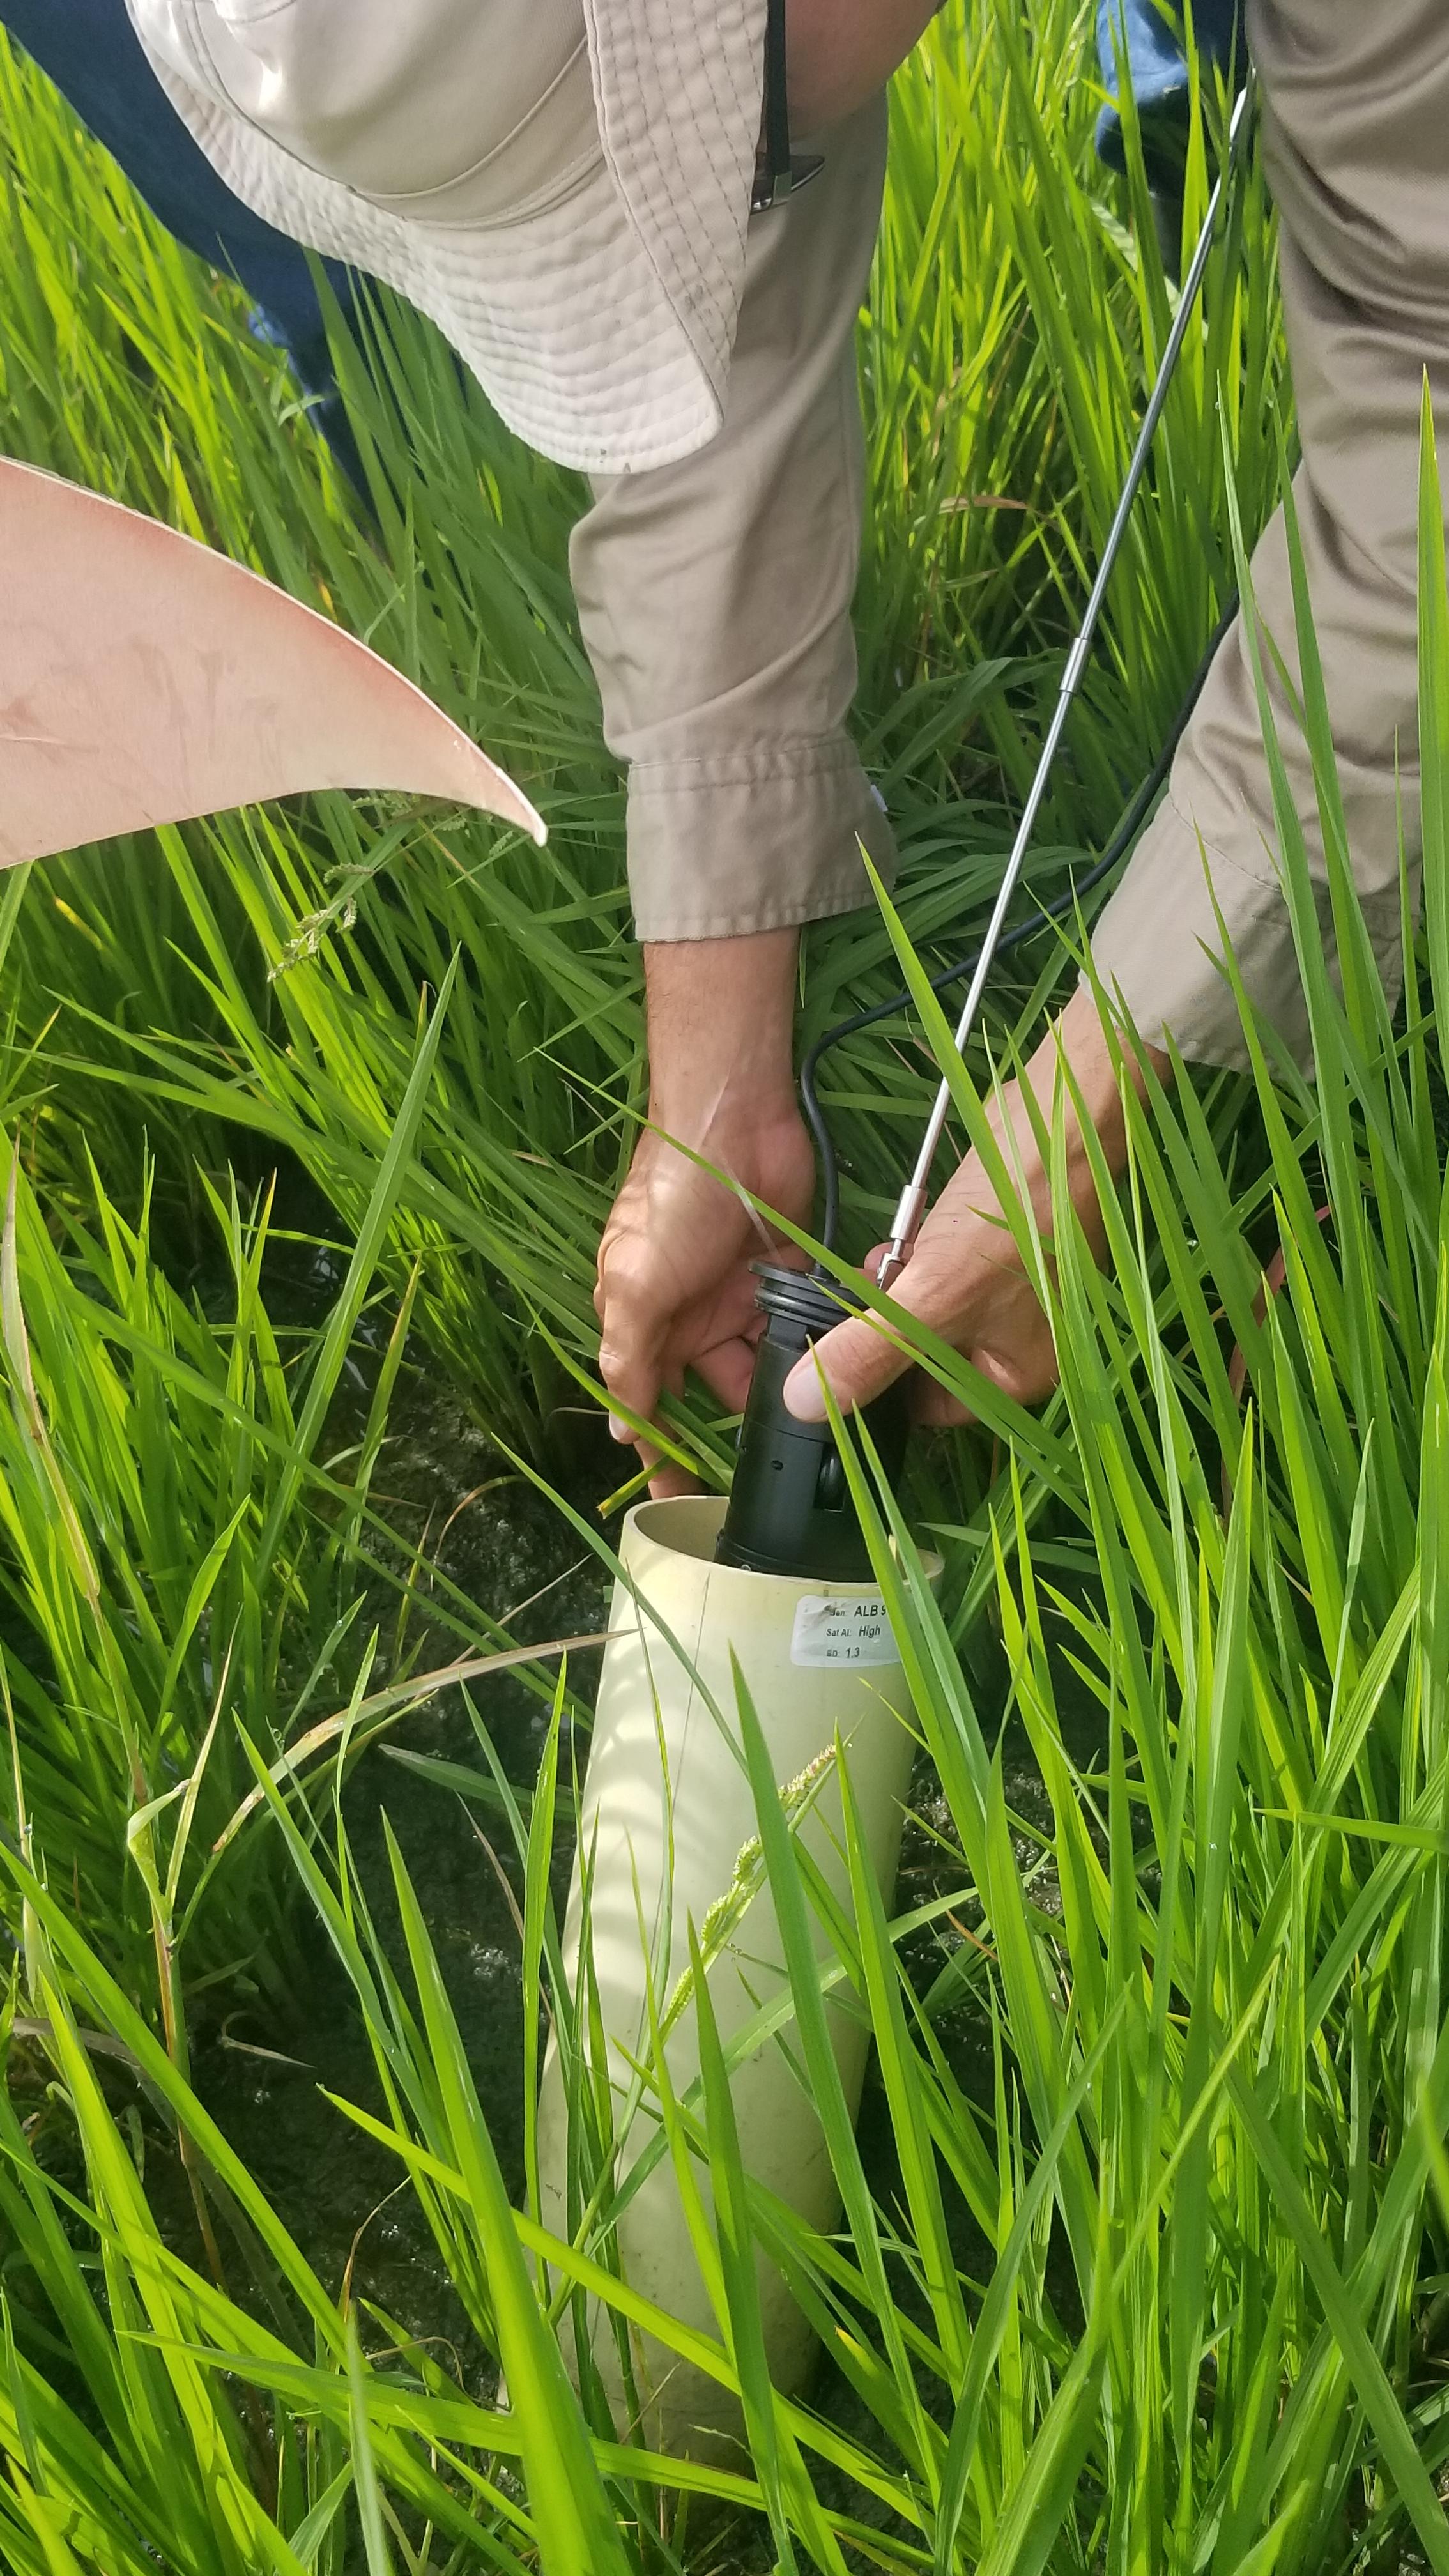 Scanning rice root in the field using root scannerjpg